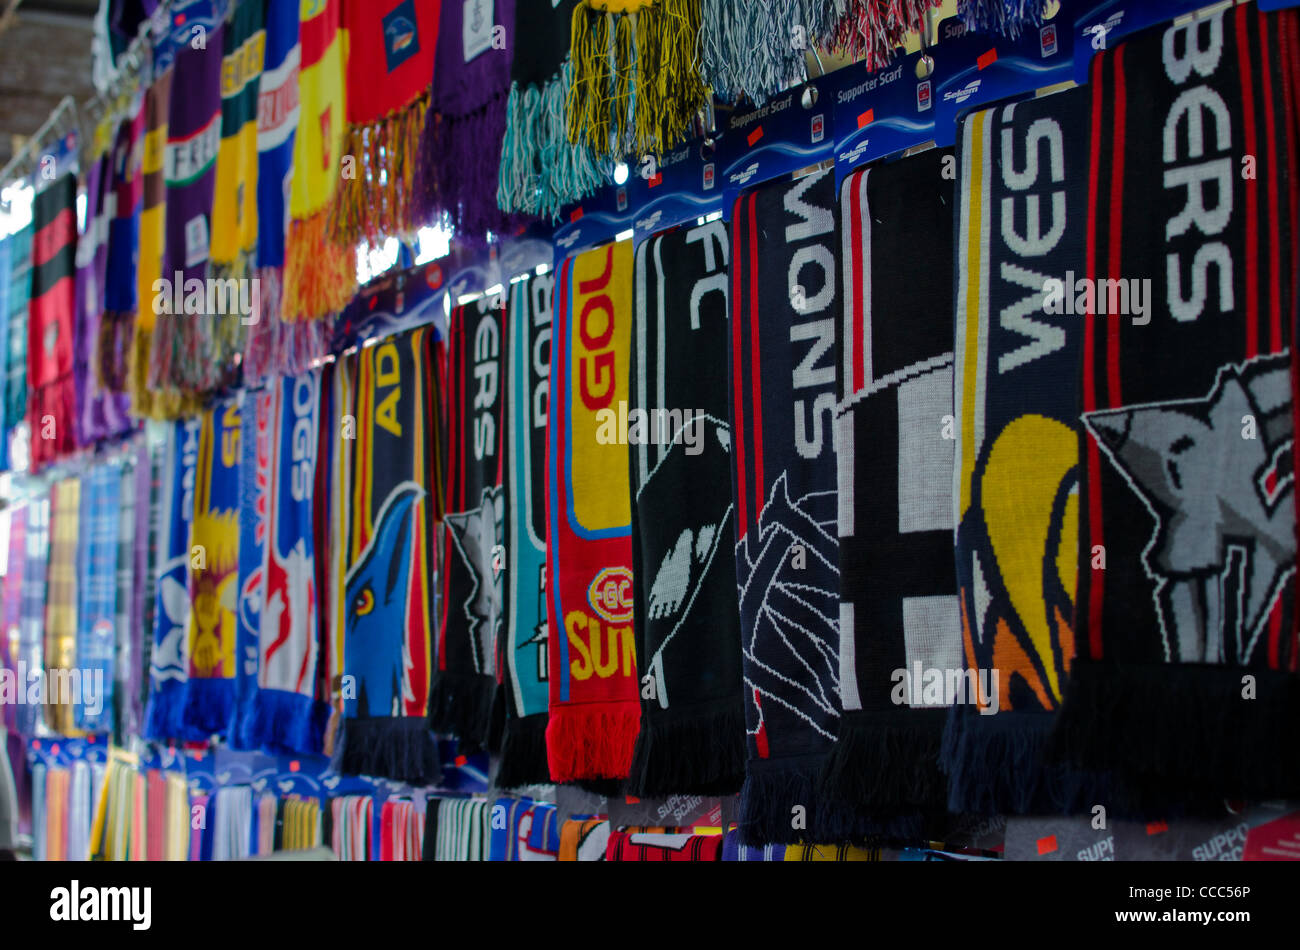 Australia Rules Football Scarves in Market, Queen Victoria Stock Photo